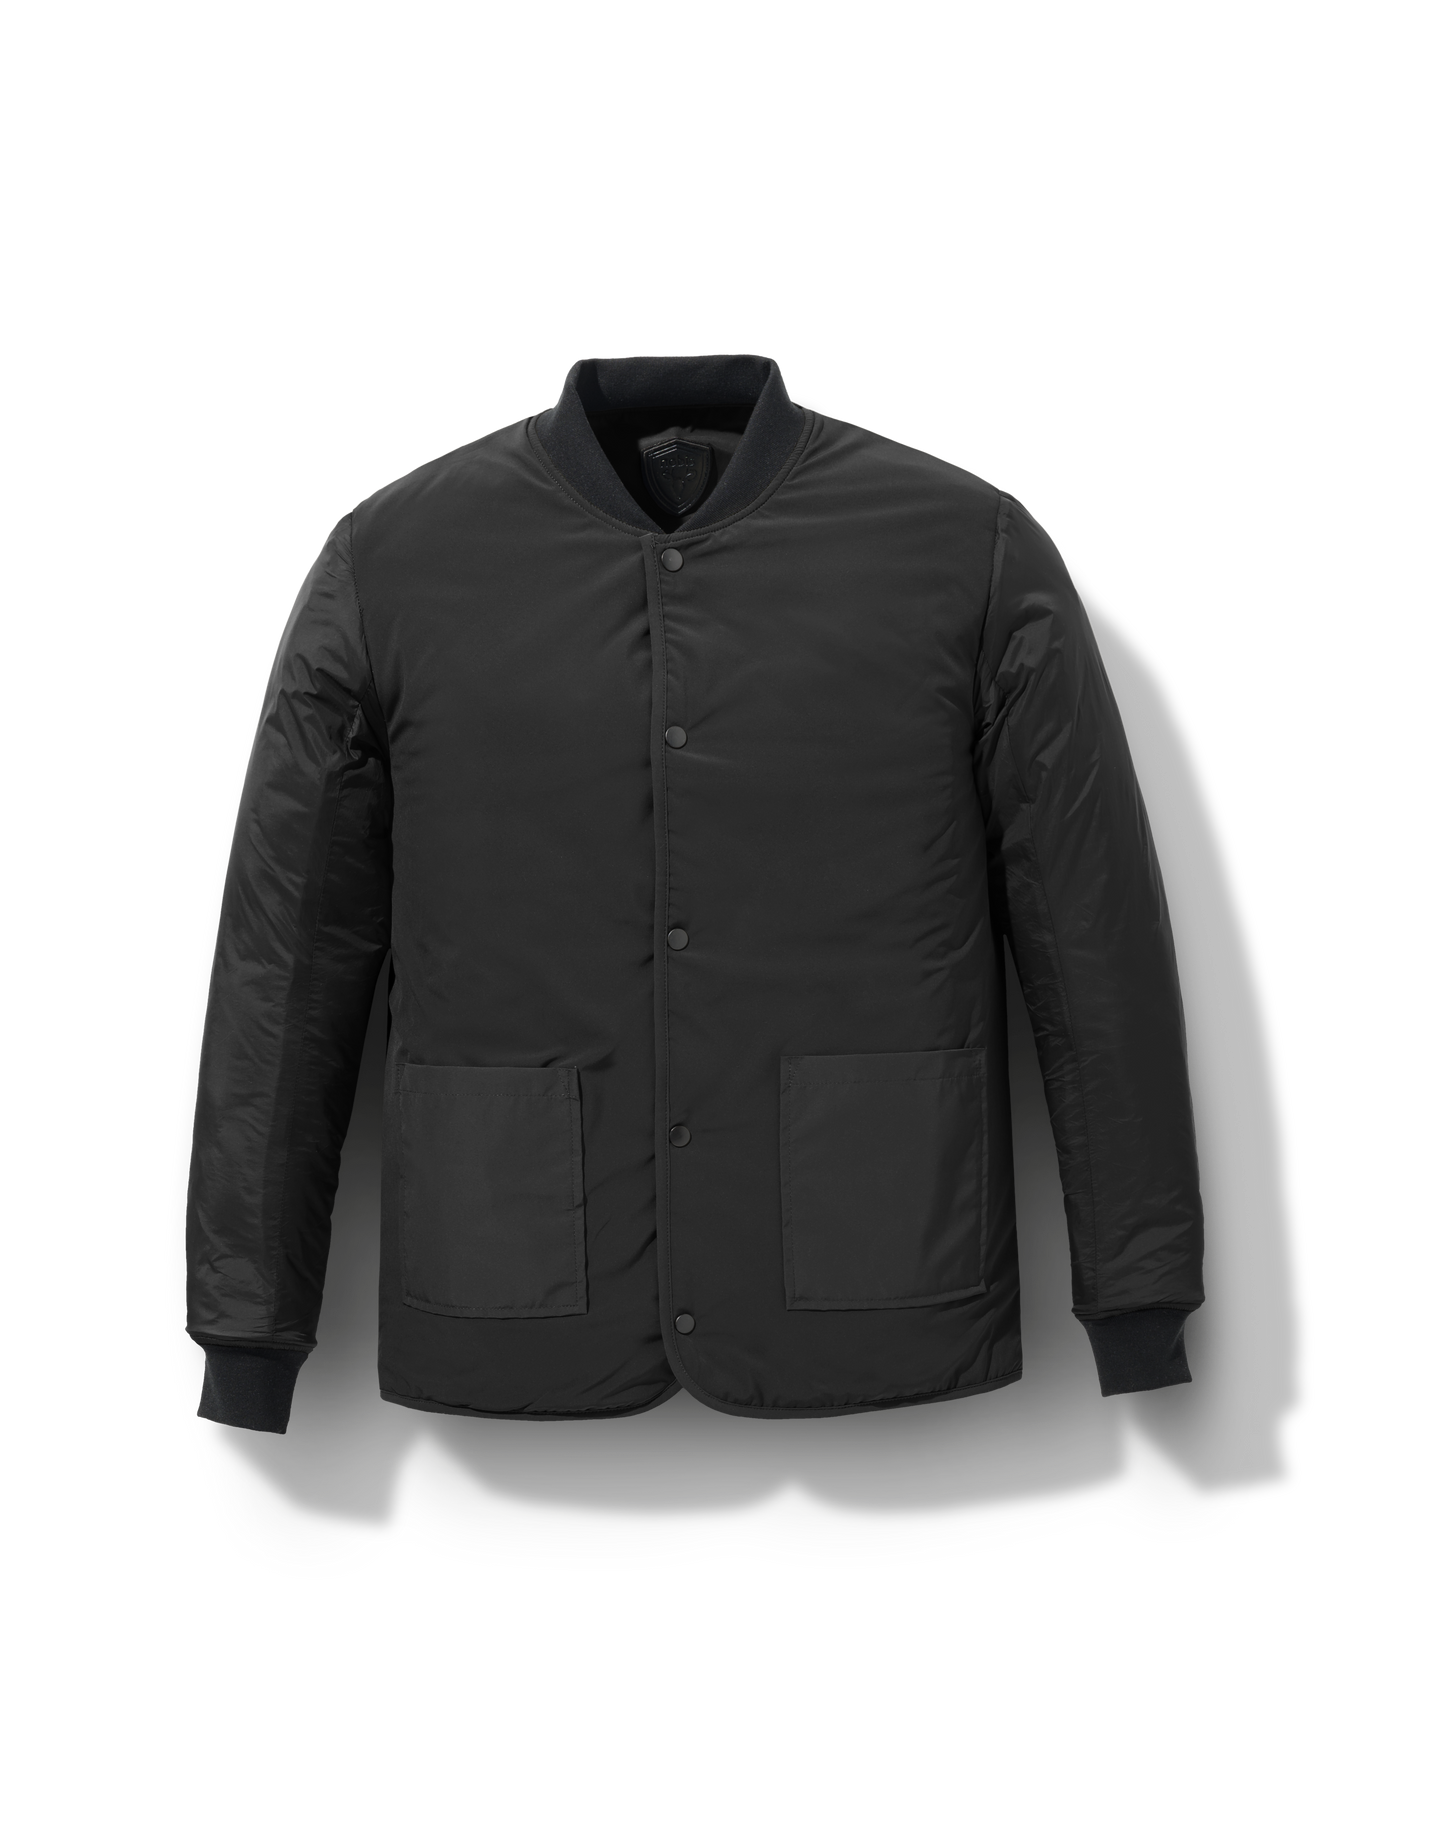 Speck Men's Tailored Mid Layer Jacket in hip length, Primaloft Gold Insulation Active+, diamond quilted body, rib knit collar and cuffs, snap buton front closure, and hidden side-entry zipper pockets at waist, in Black